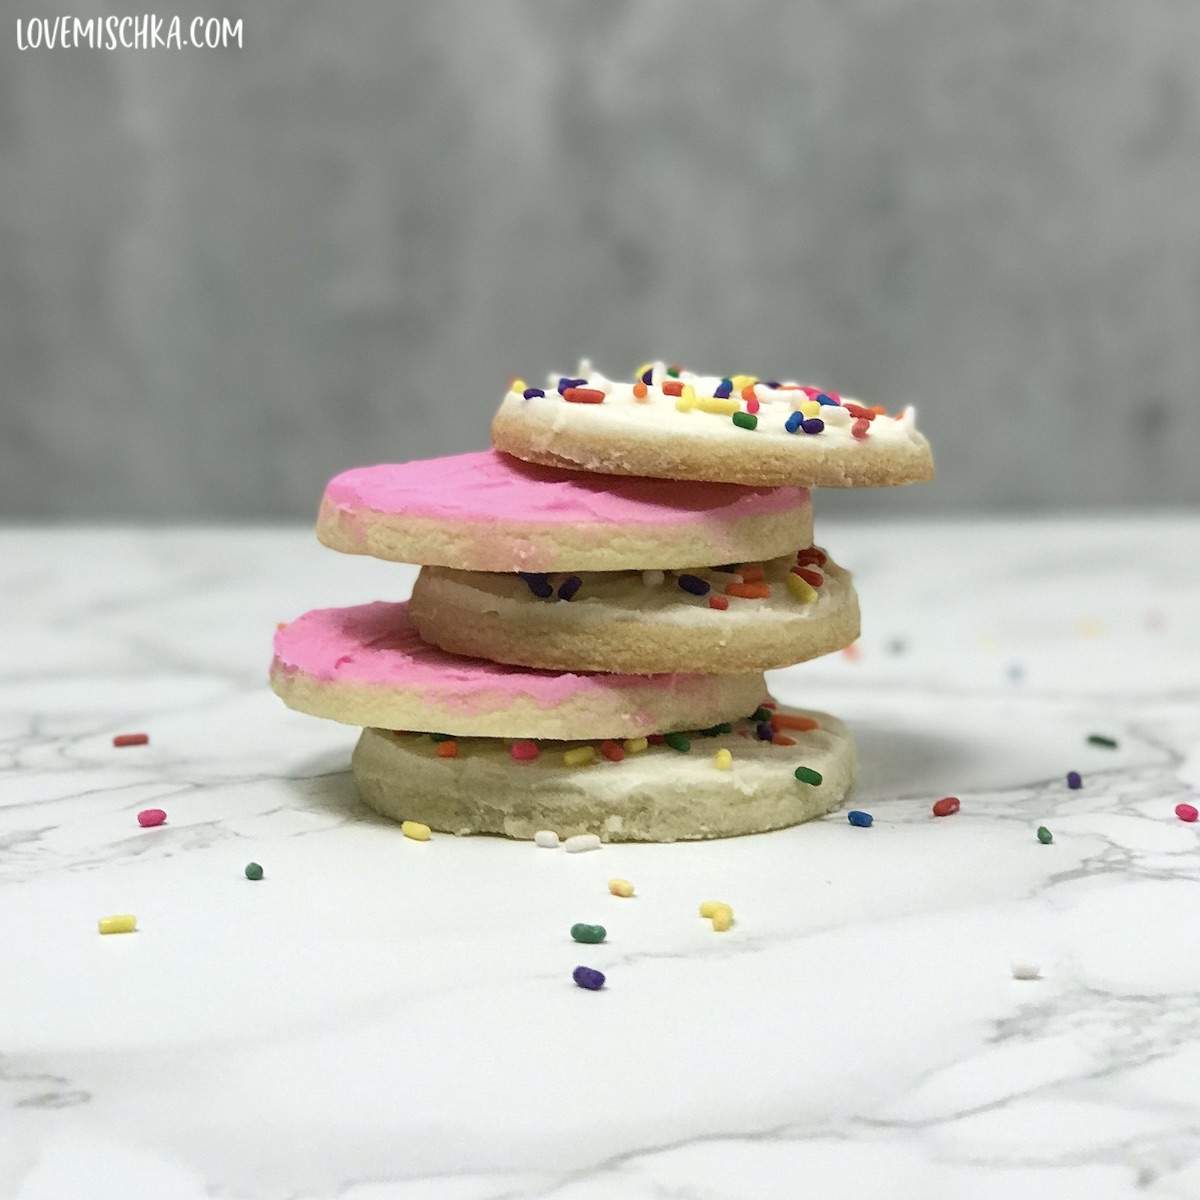 Round Sugar Cookies topped with this Buttercream Frosting Recipe for Cookies are stacked on top of one another.